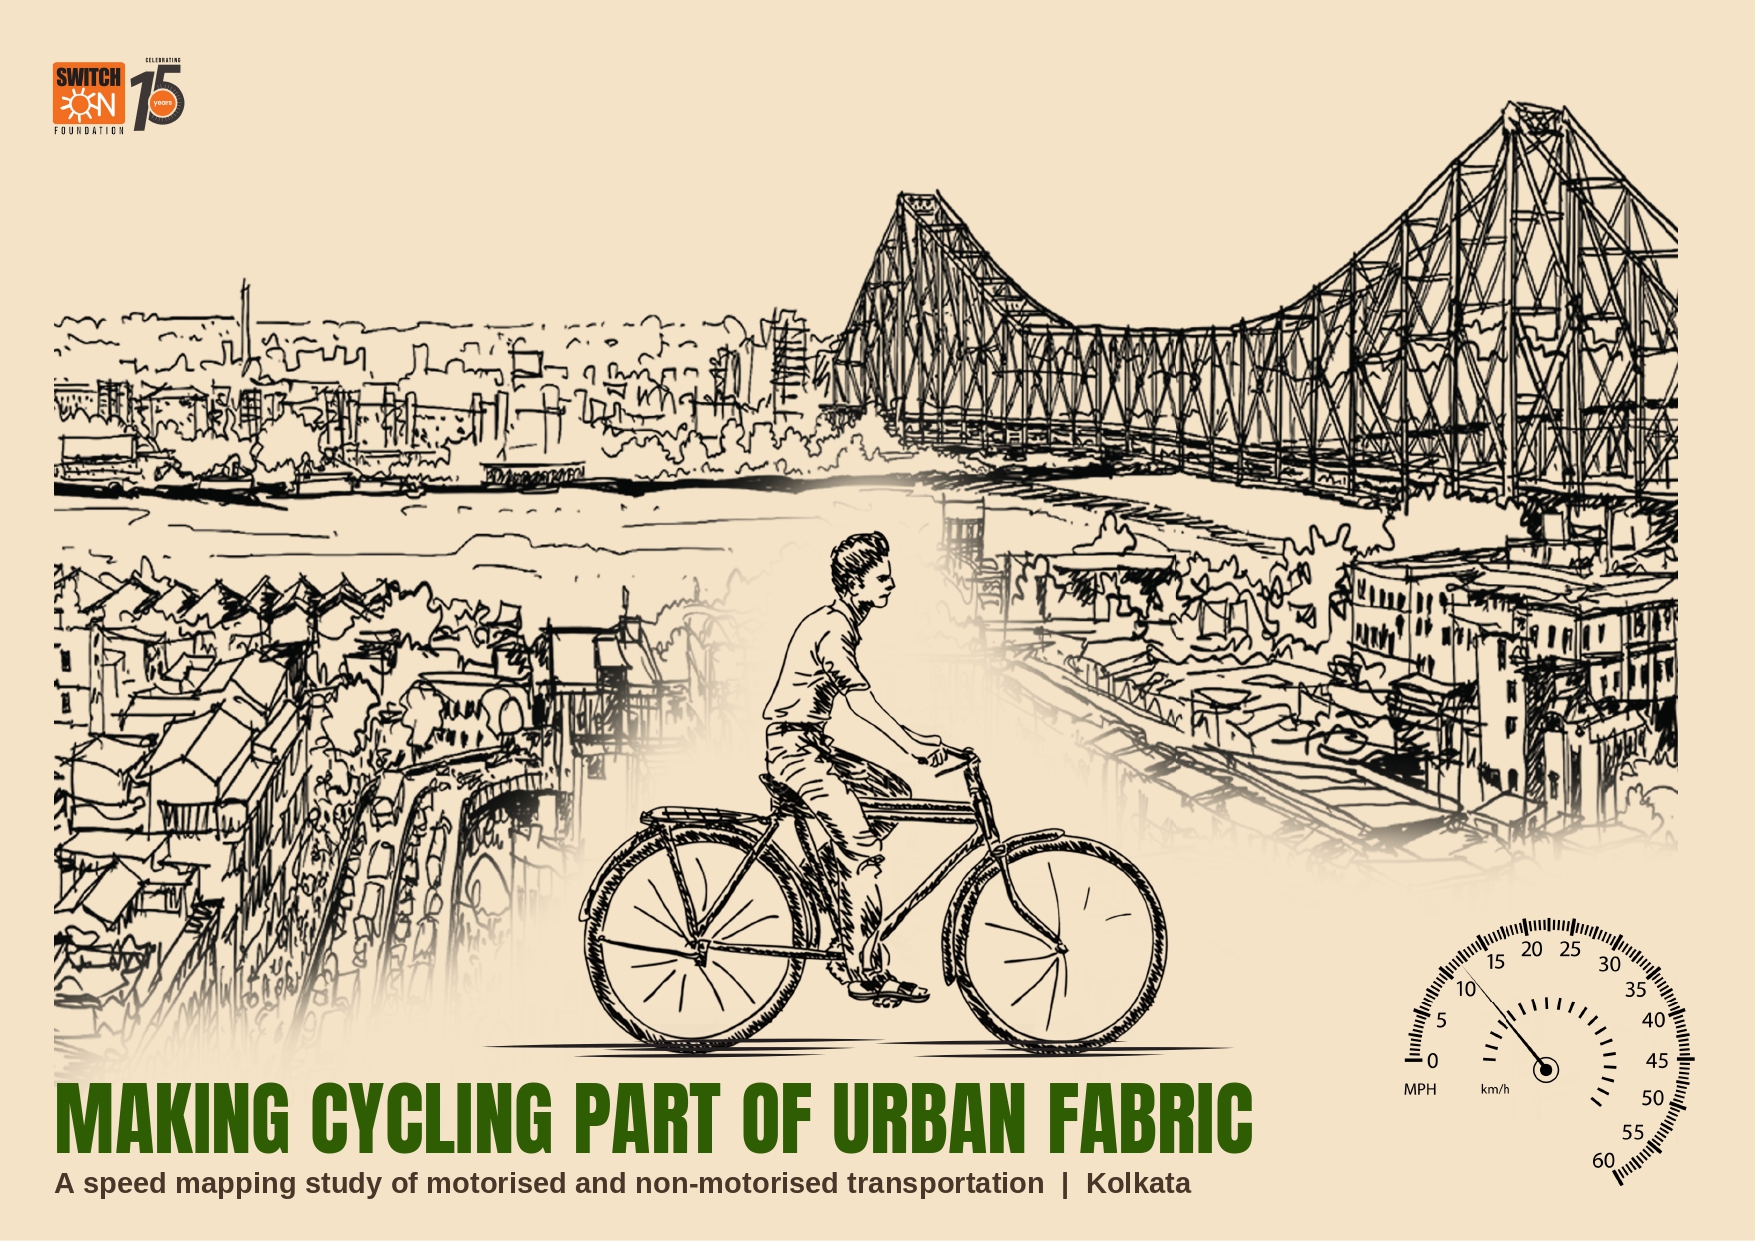 Making Cycling Part of Urban Fabric – A Speed Mapping Study